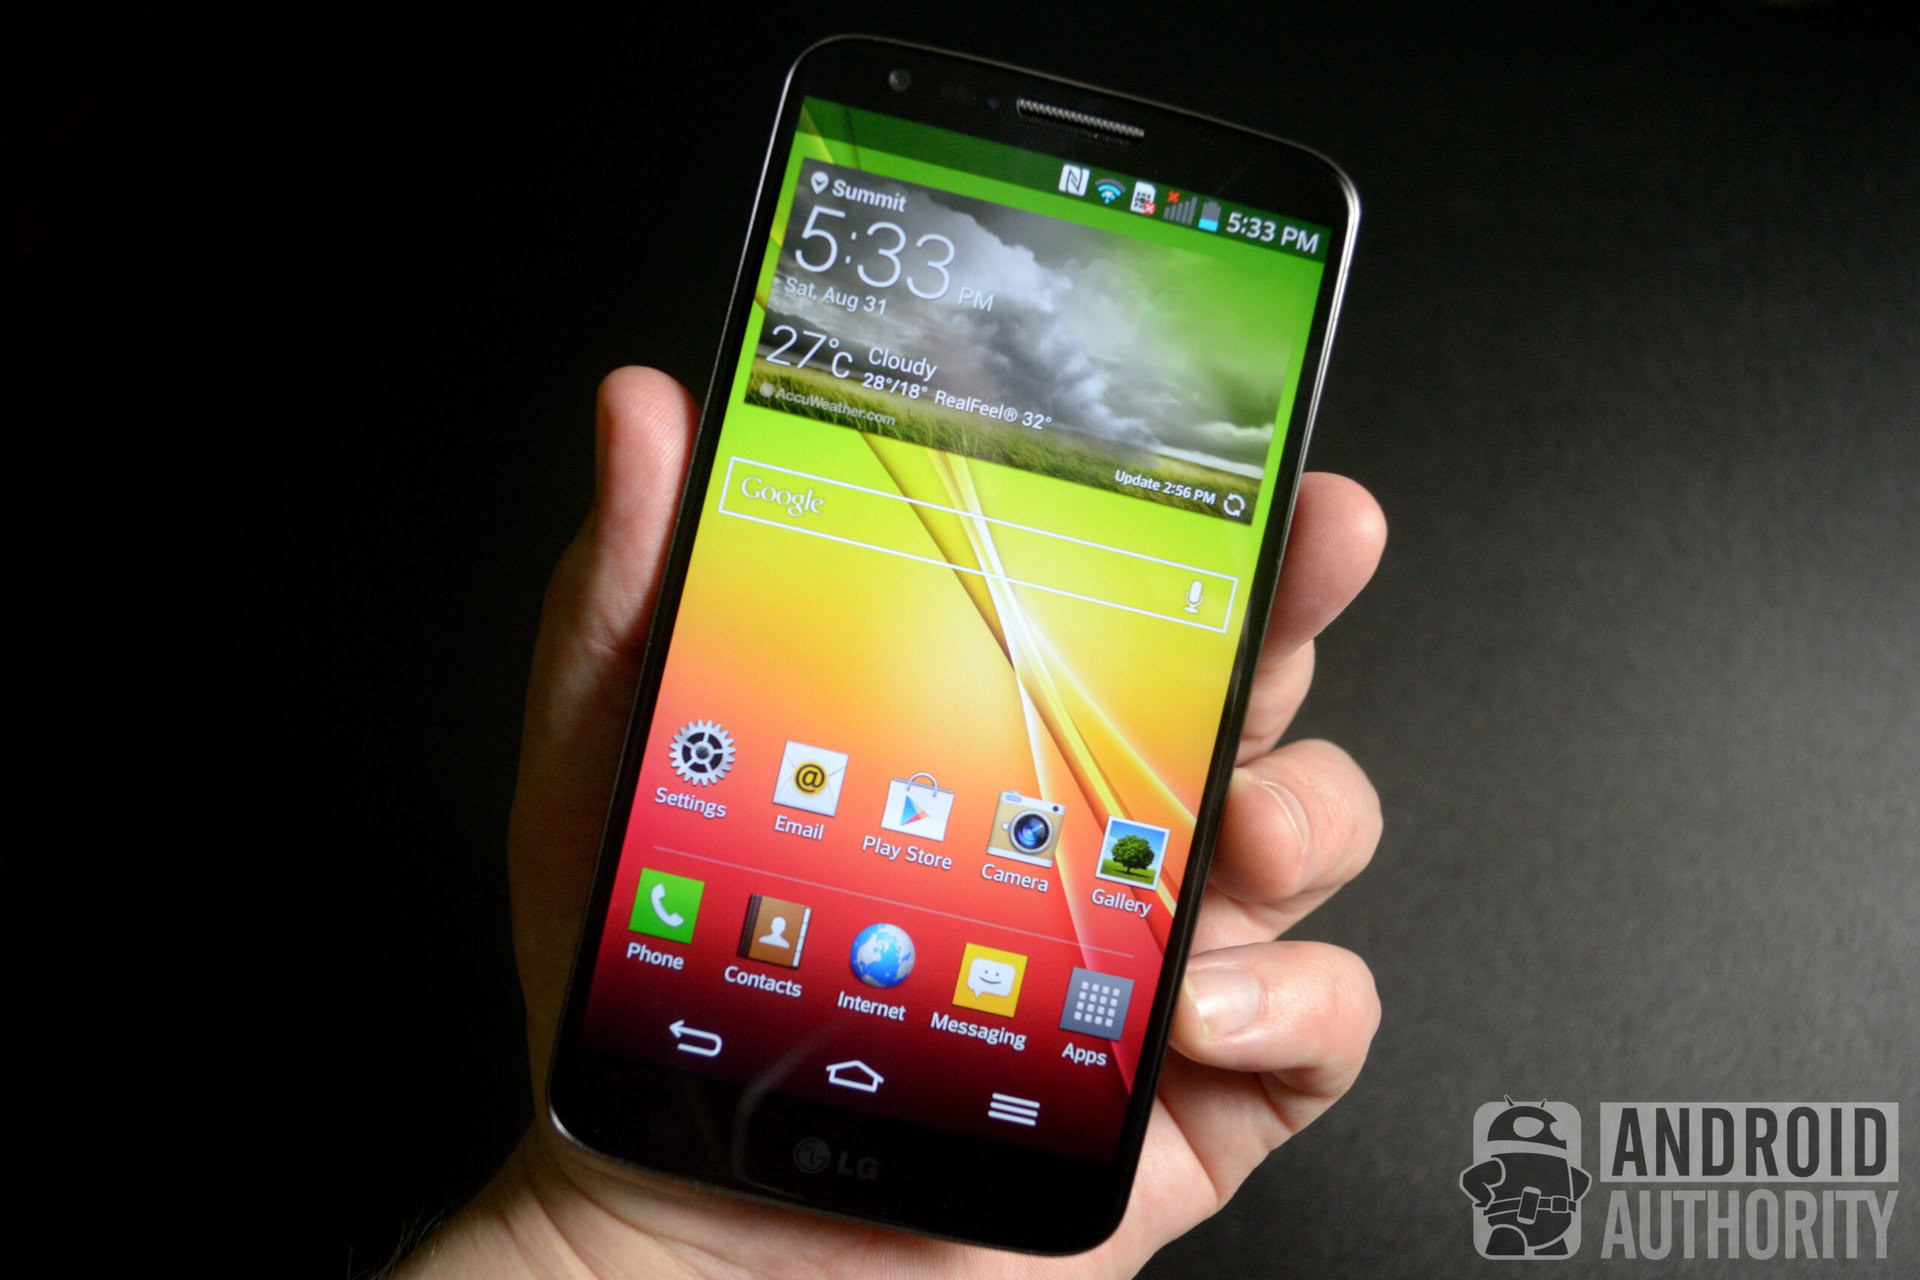 LG G2 Review Hands On